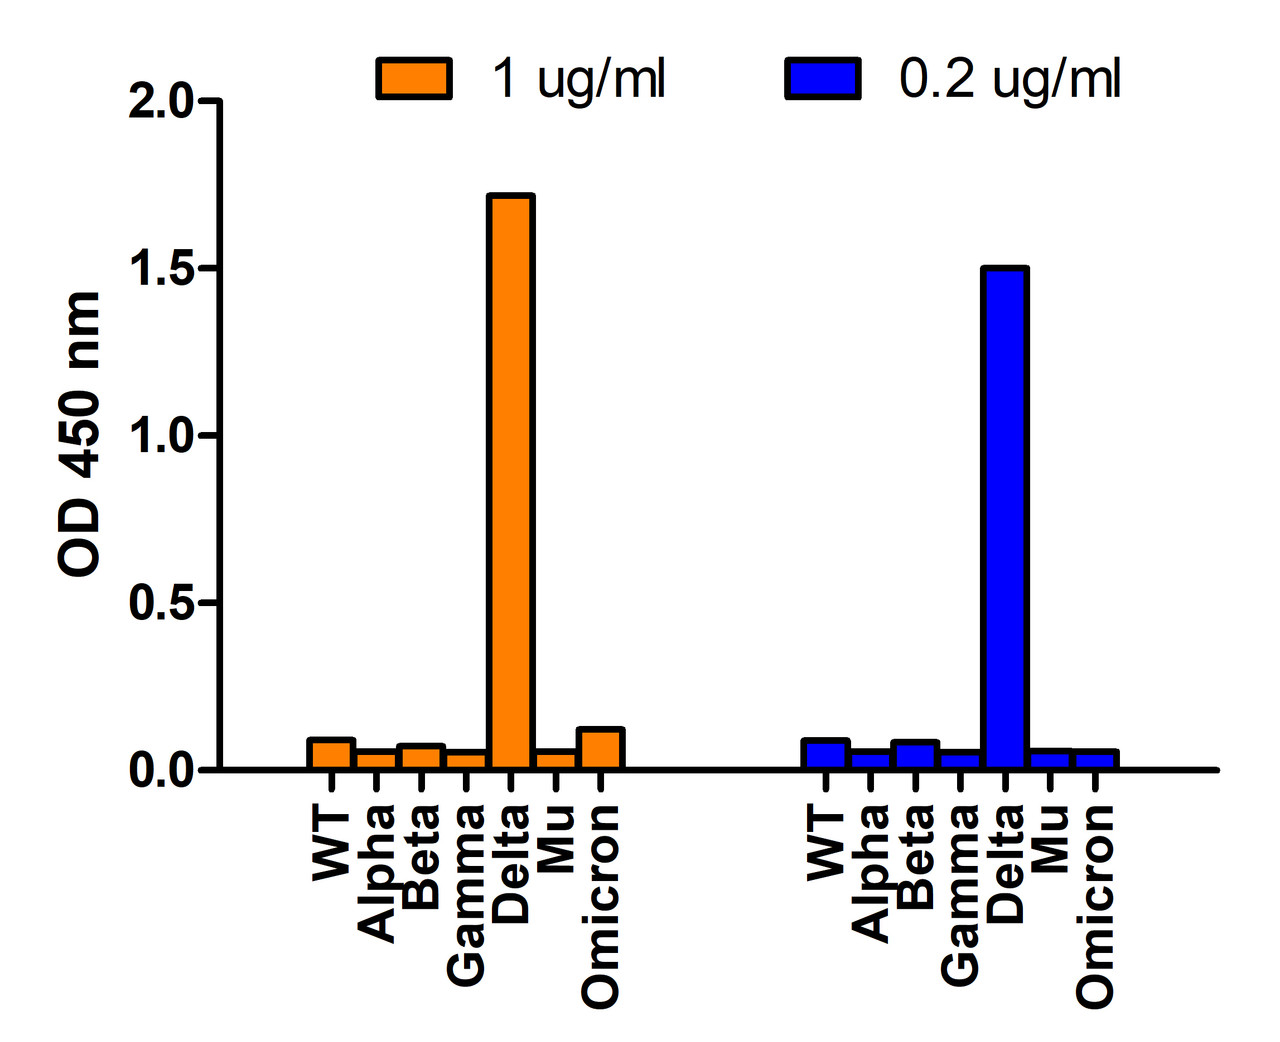 Figure 1 SARS-Cov-2 Spike 156-157EFdel ( Delta Variant ) Antibodies Specifically Detect Delta Variant Spike S1 Protein in an ELISA 
Coating Antigen: SARS-CoV-2 spike S1 proteins WT, alpha variant (B.1.1.7) , beta variant (B.1.351) , gamma variant (P.1) , delta variant (B.1.617.2) , mu variant (B.1.621) , and omicron variant (B.1.1.529) , 1 &#956;g/mL, incubated at 4 &#730;C overnight.
Detection Antibodies: SARS-CoV-2 Delta Variant Spike antibody, 9689, dilution: 200 and 1000 ng/mL, incubated at RT for 1 hr.
Secondary Antibodies: Goat anti-rabbit HRP at 1:20, 000, incubated at RT for 1 hr.